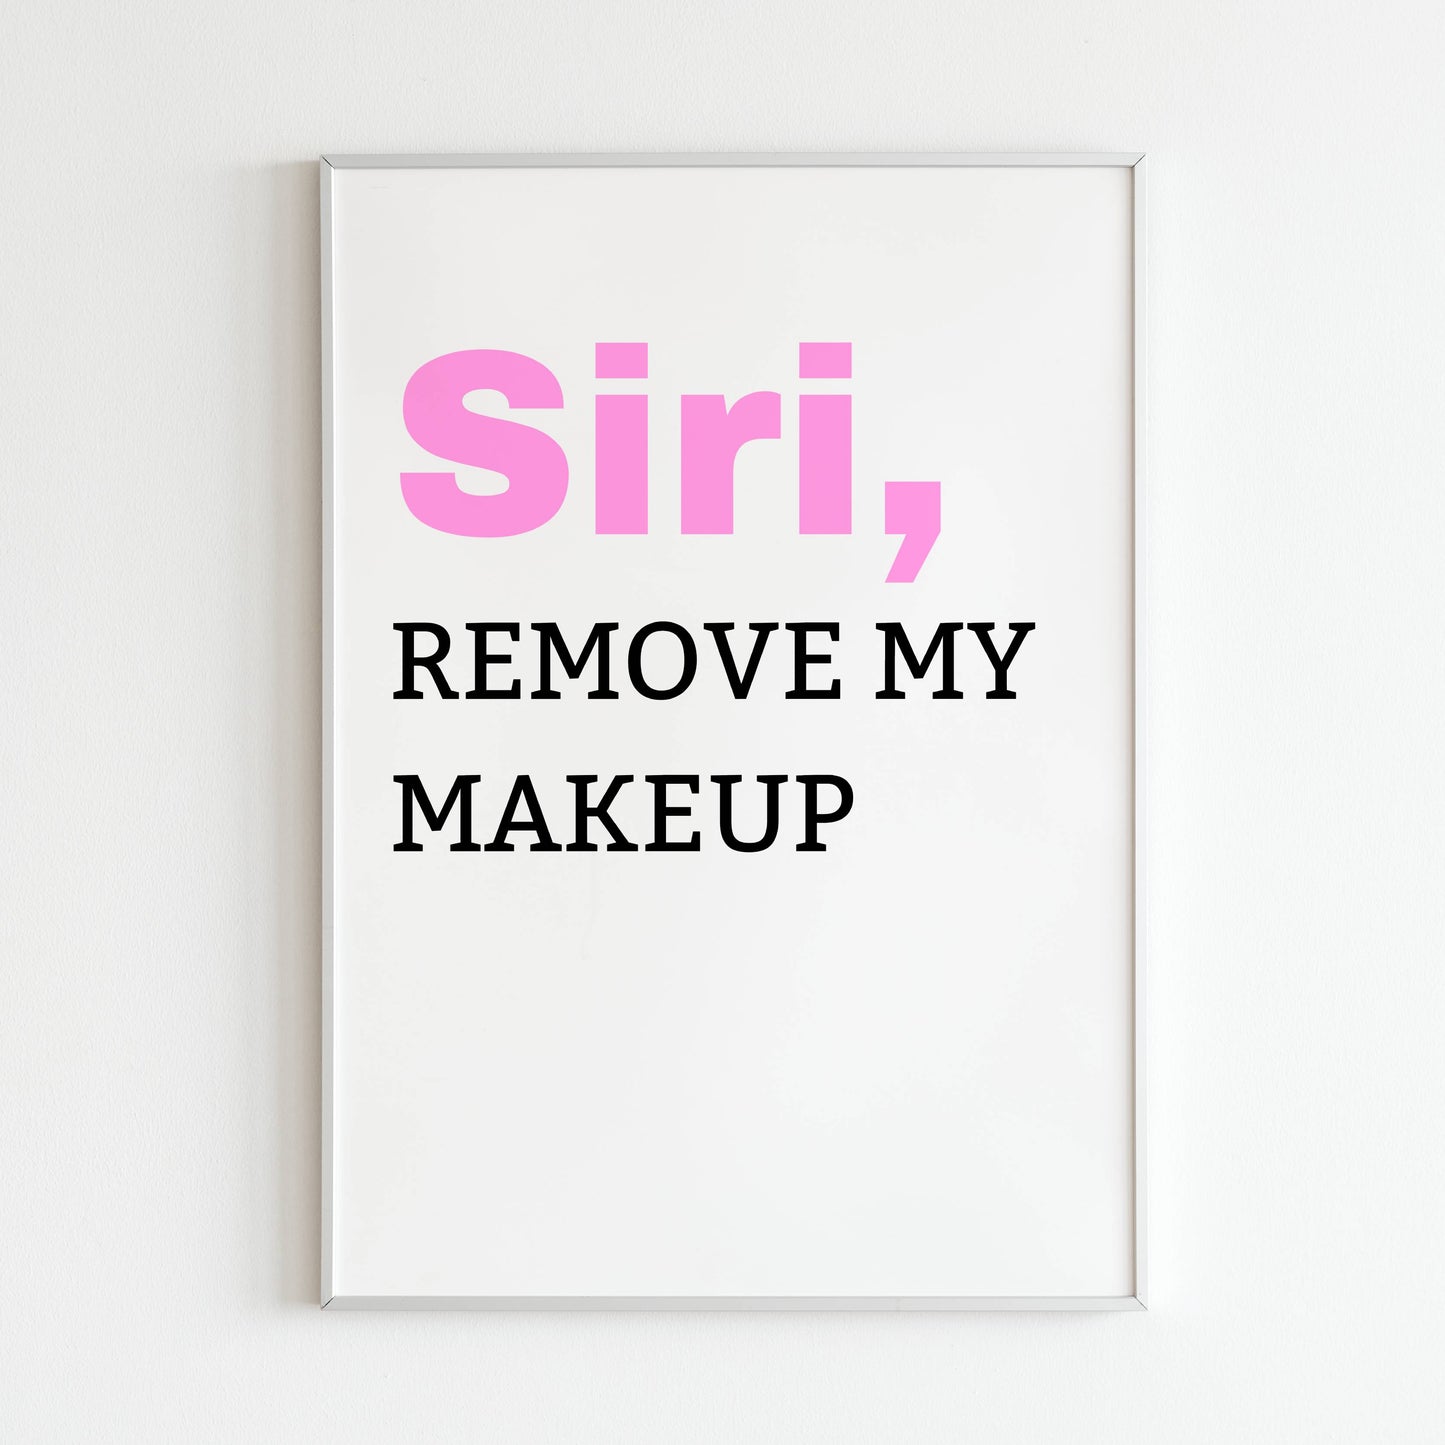 Downloadable "SIRI, remove my makeup" art print, add a touch of humor to your self-care rituals.